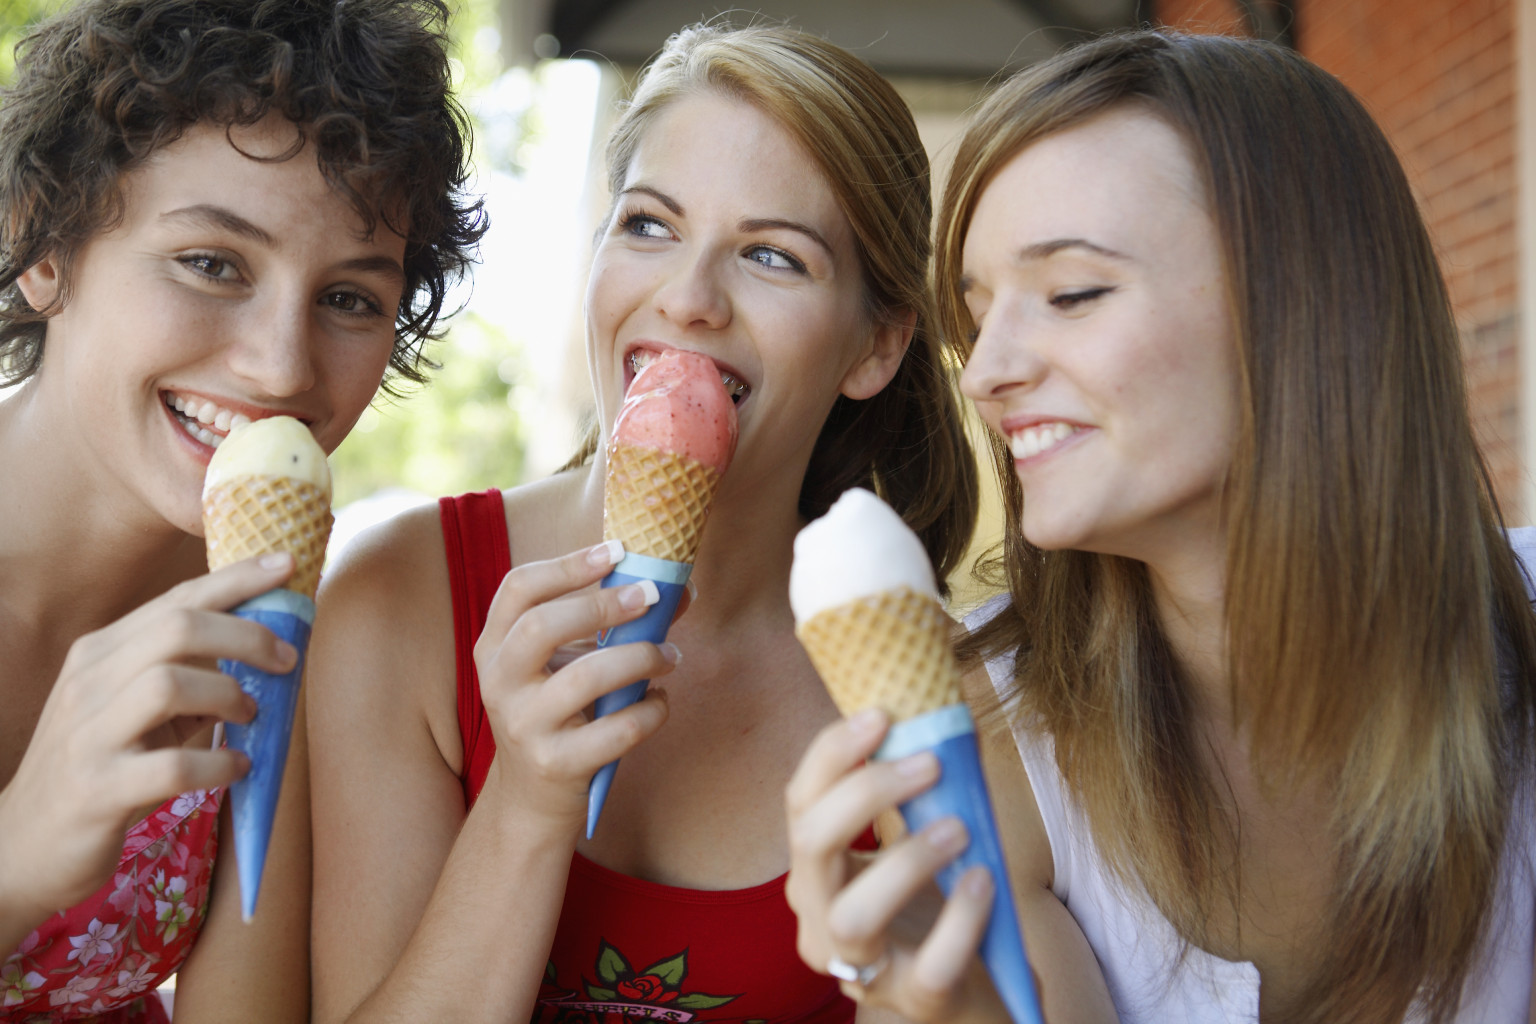 Create Your Own Ice Cream Flavor to Know What People Fi… Quiz person eating ice cream